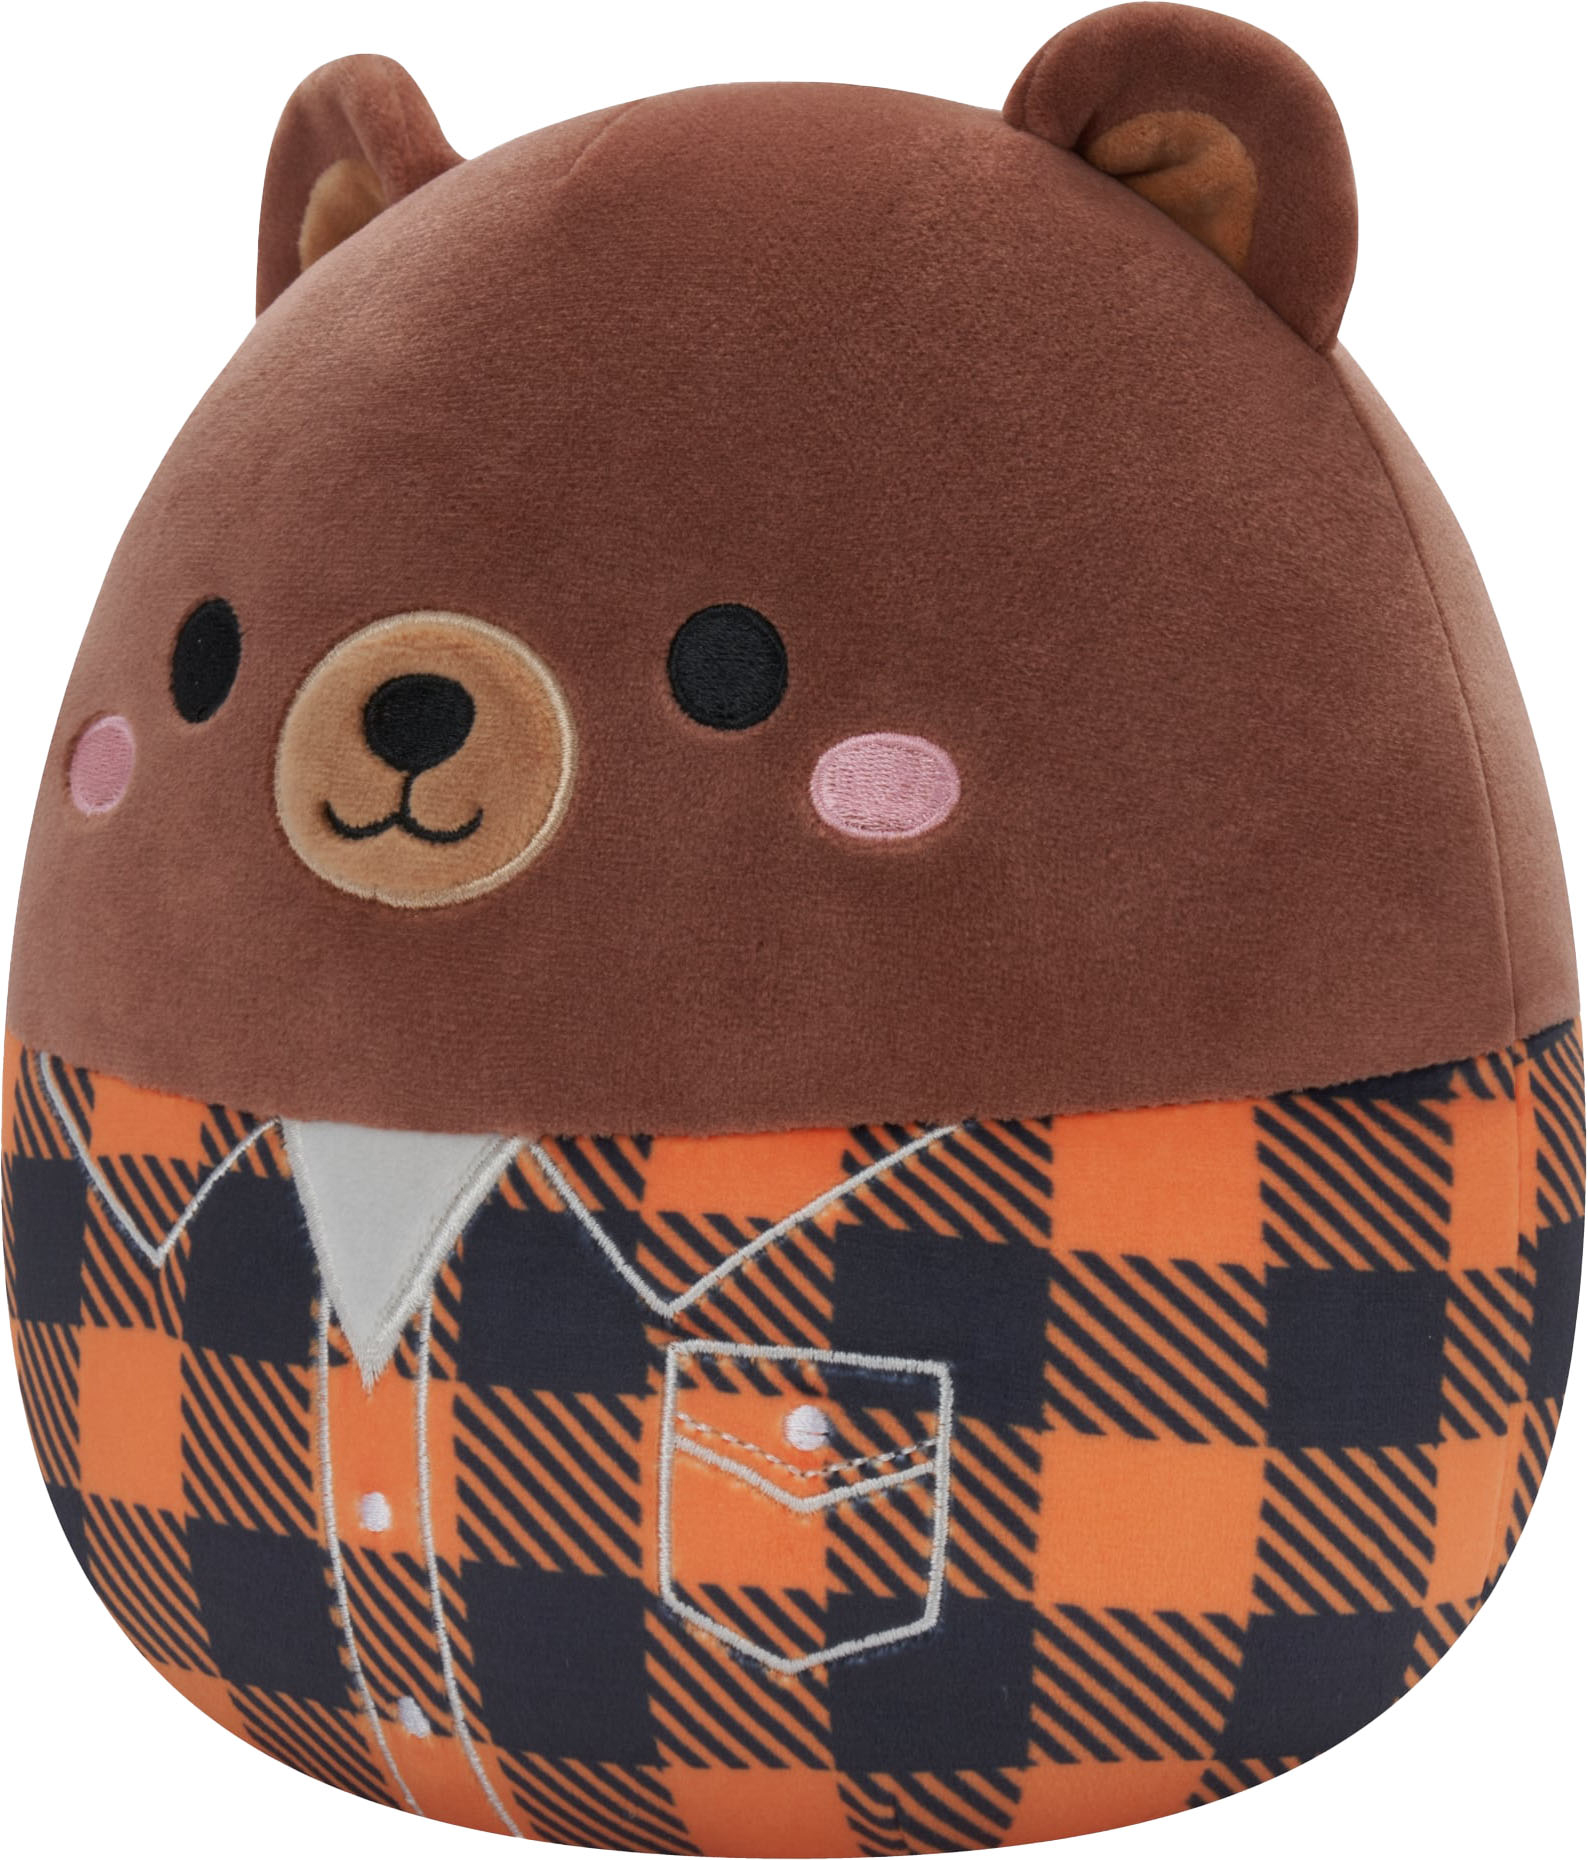 Angle View: Jazwares - Squishmallows 16" Plush - Harvest Squad Brown Bear in Jacket - Omar